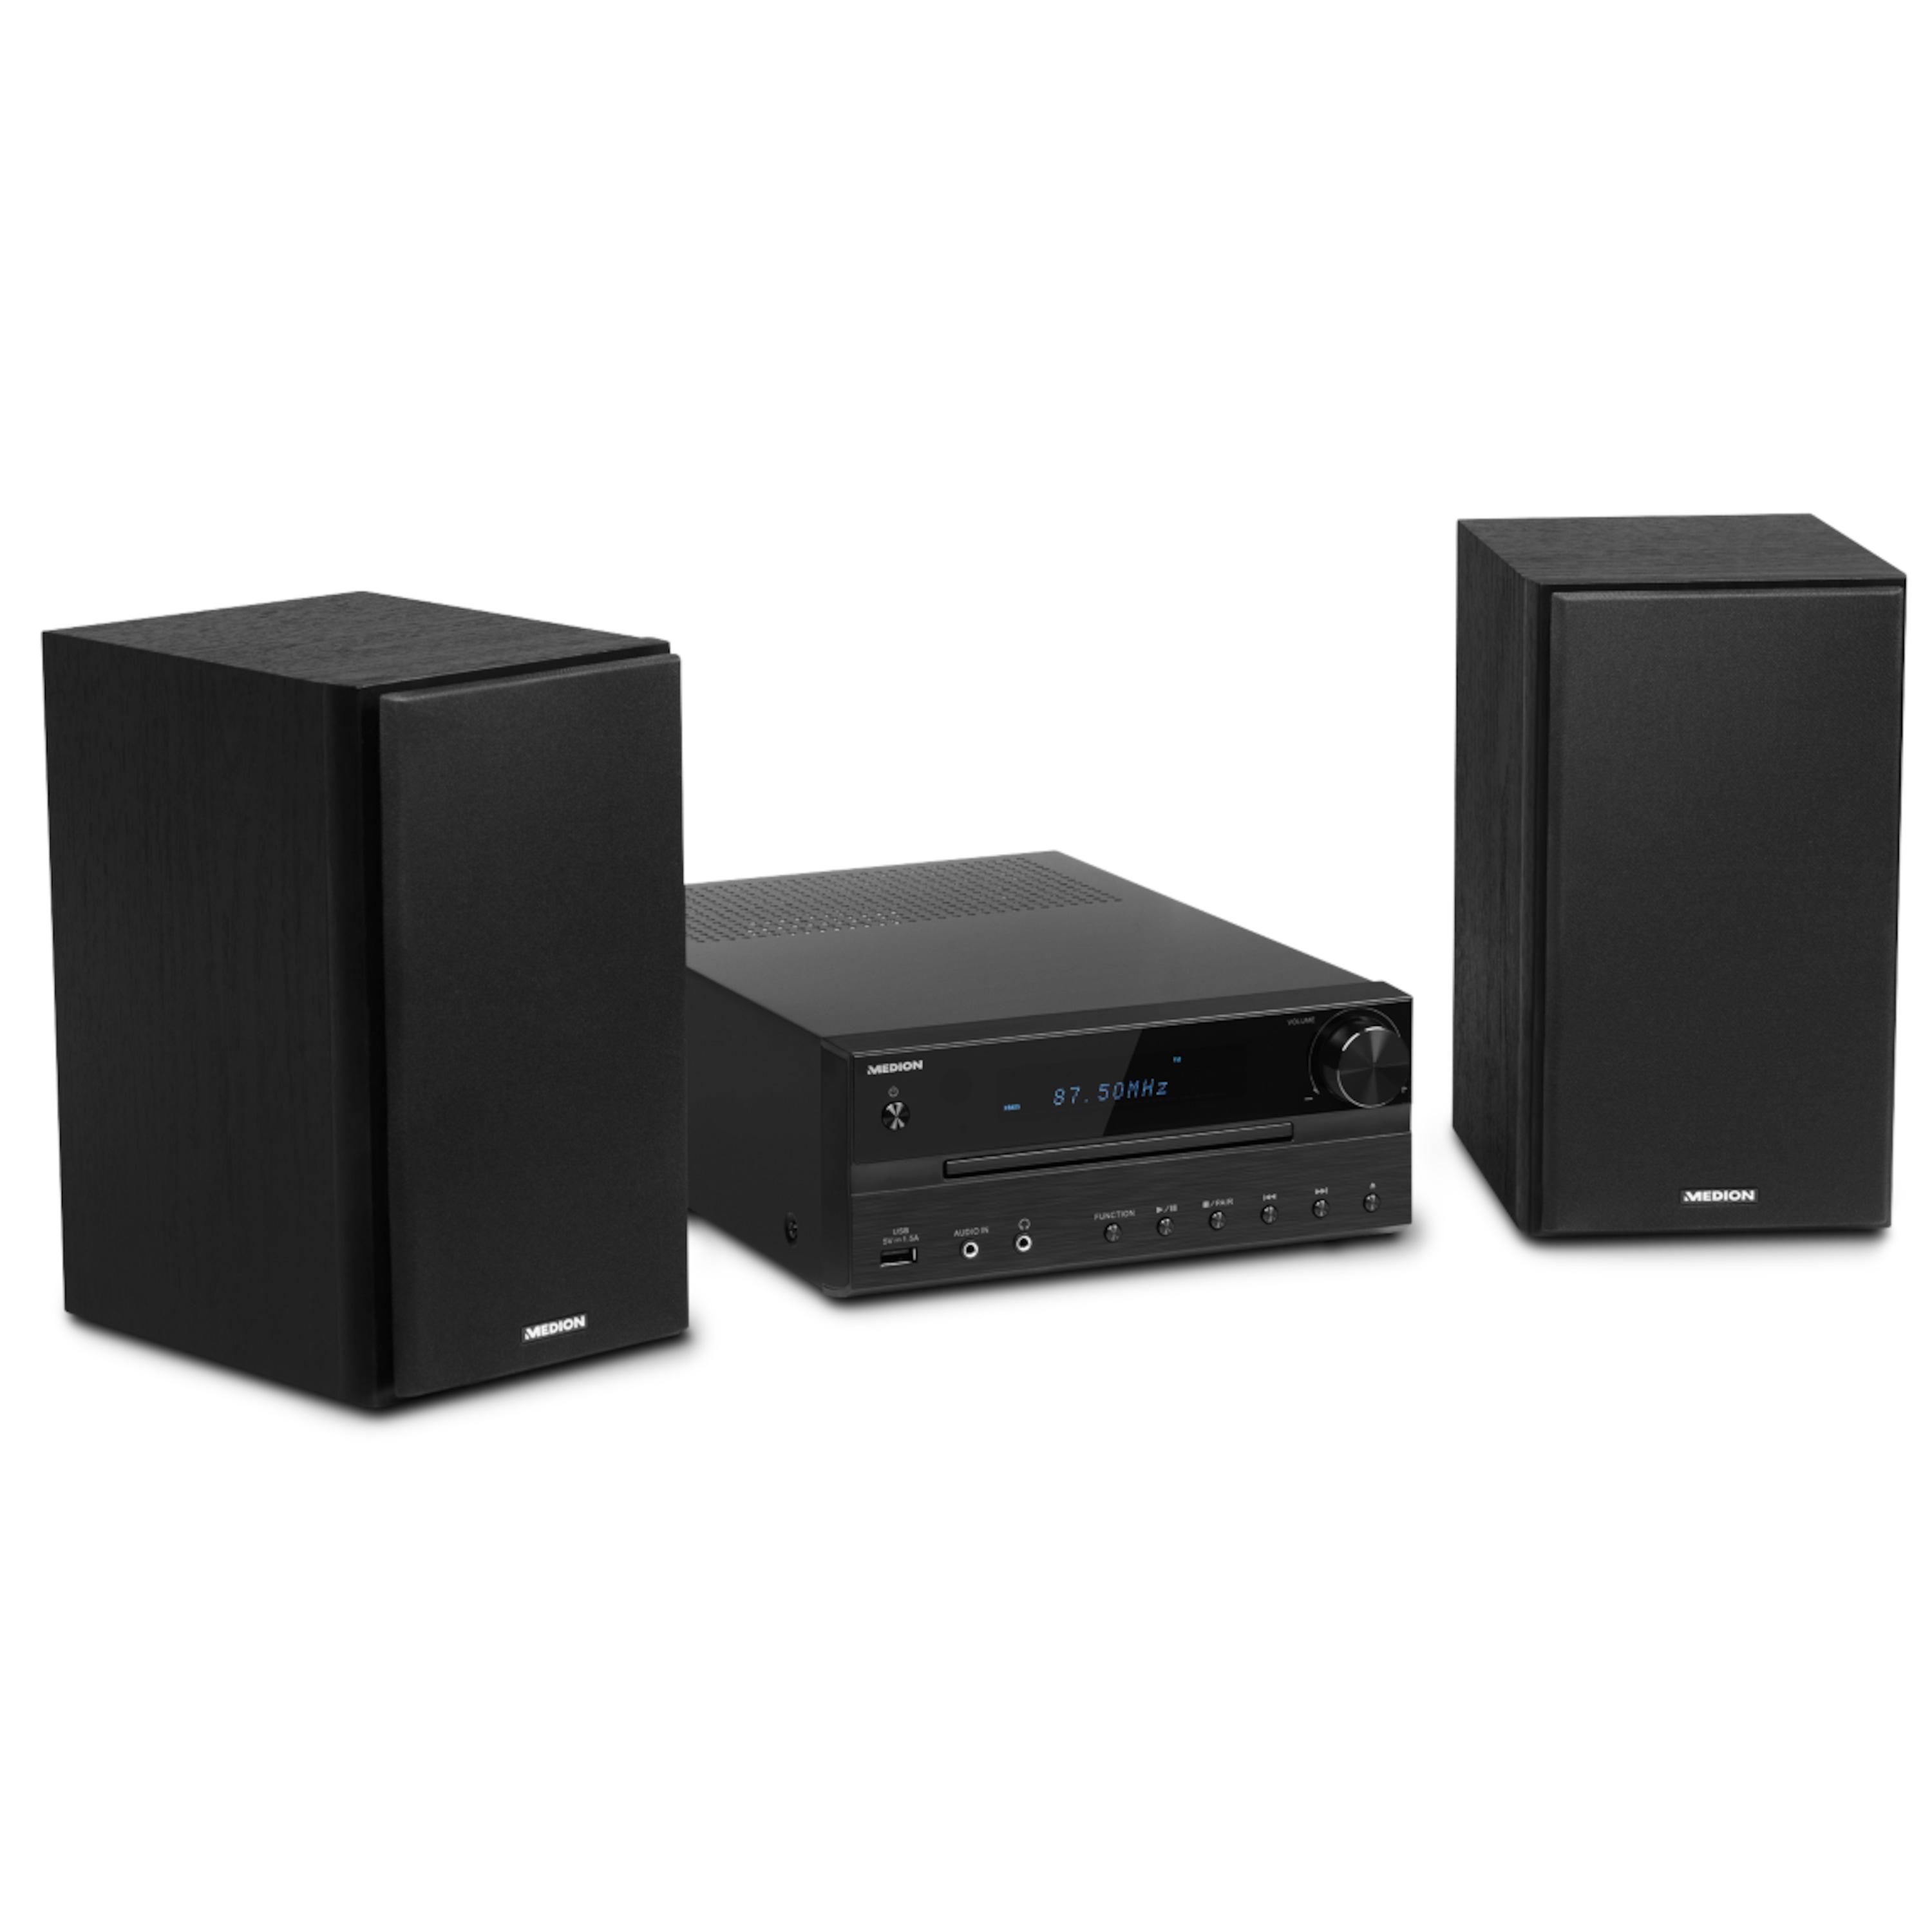 MEDION® LIFE® P64262 Micro-Audio-System mit CD-Player, DAB+, Bluetooth® 4.1, USB-Anschluss & -Ladefunktion, AUX, PLL-UKW Stereo-Radio, 2 x 15 W RMS